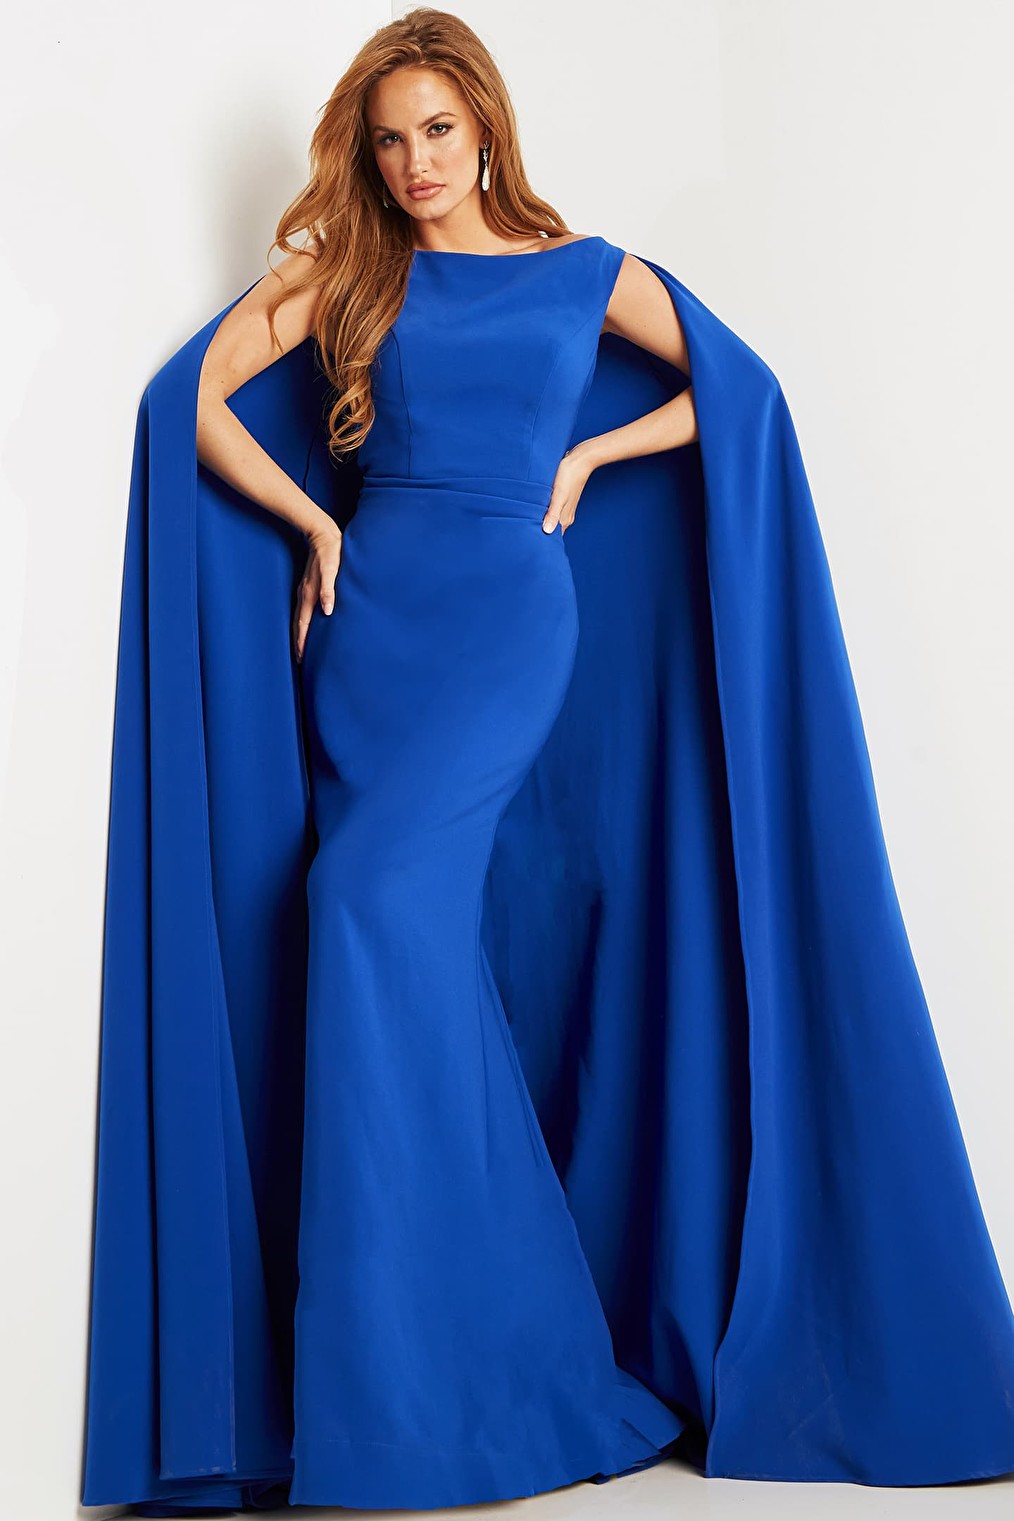 Royal dress with long cape 09755